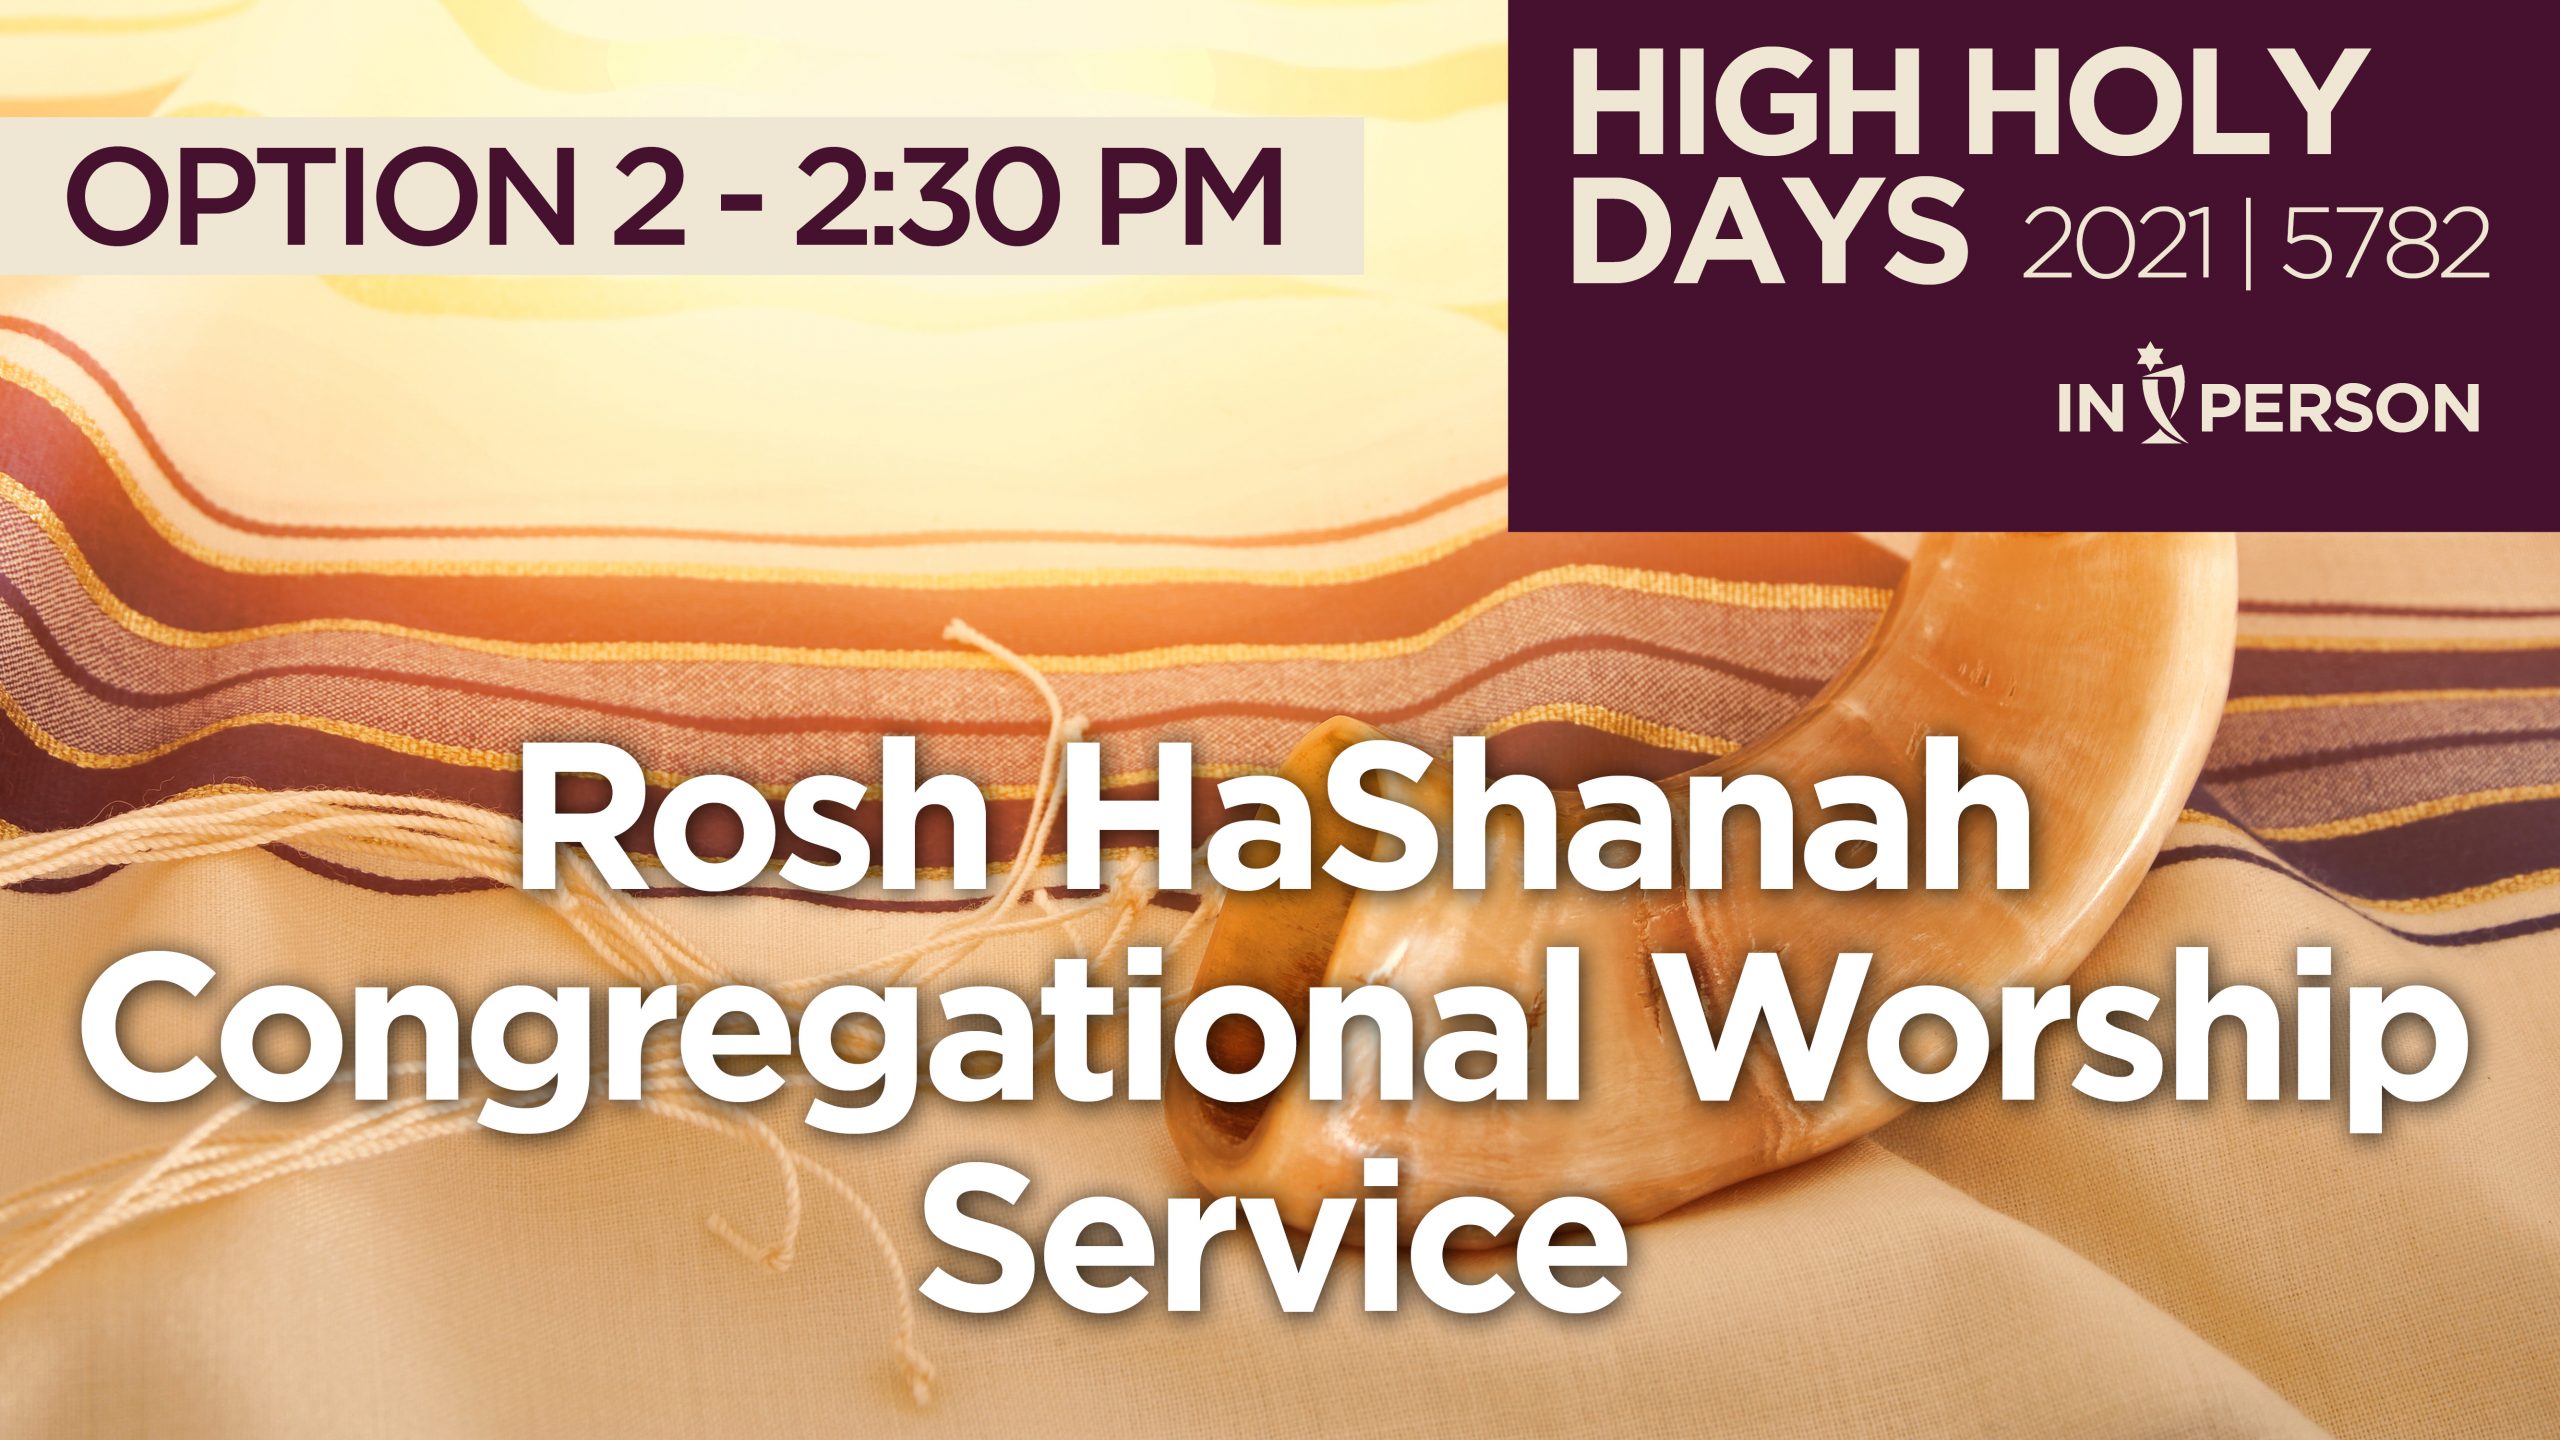 Rosh HaShanah Services Announcement Graphic for 2021 5782